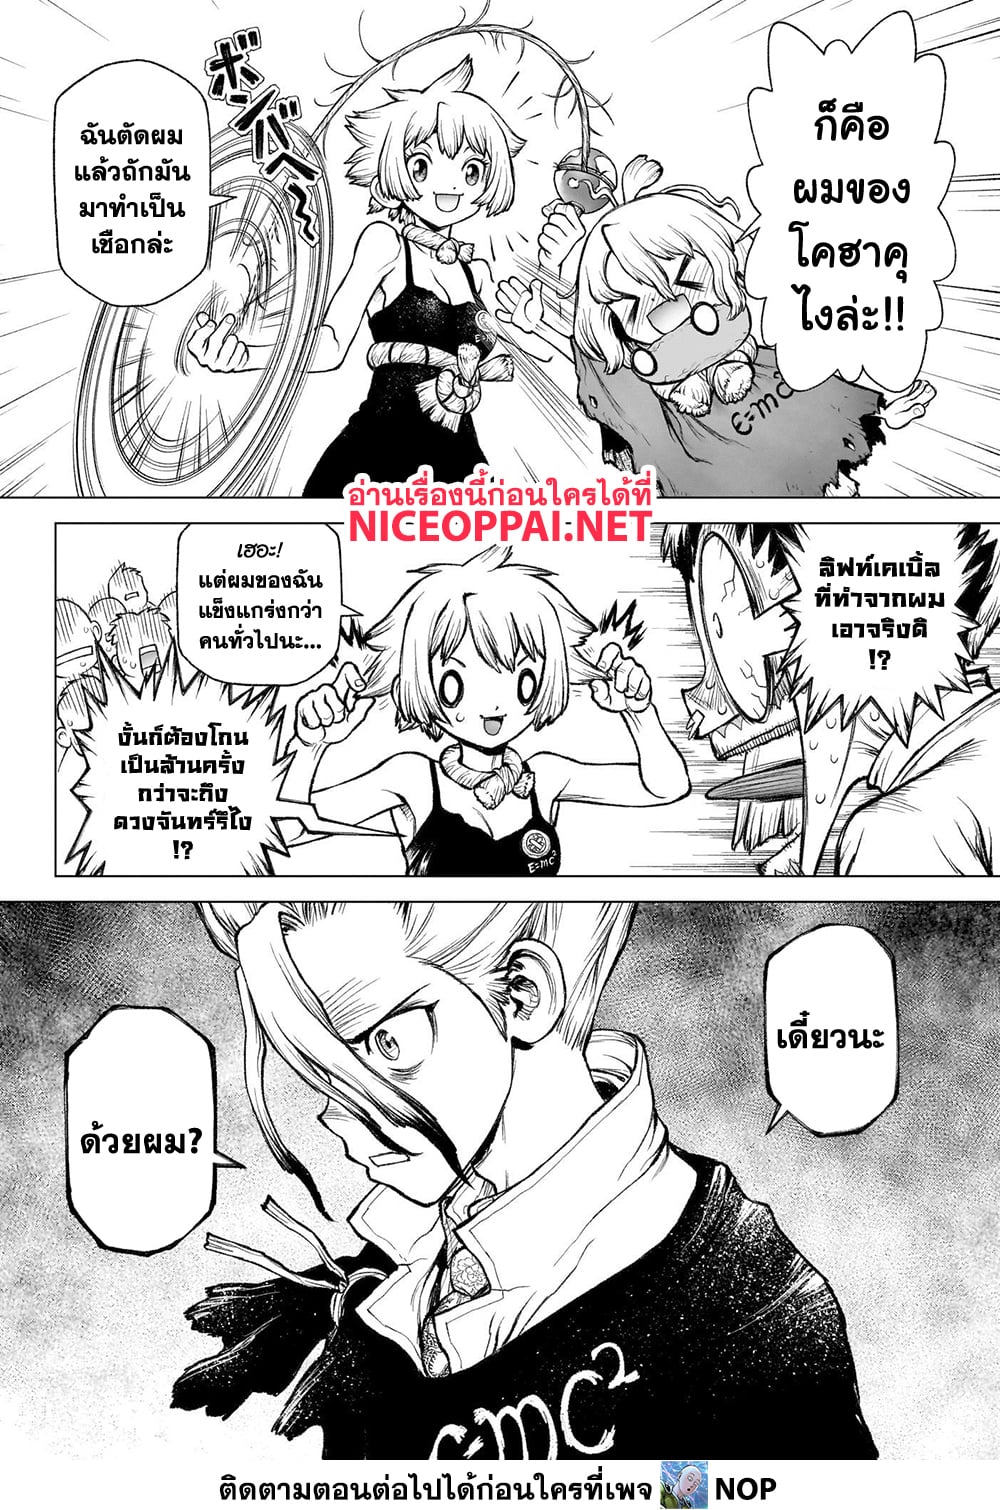 Dr.Stone 234-2D: FUTURE ROAD MAP